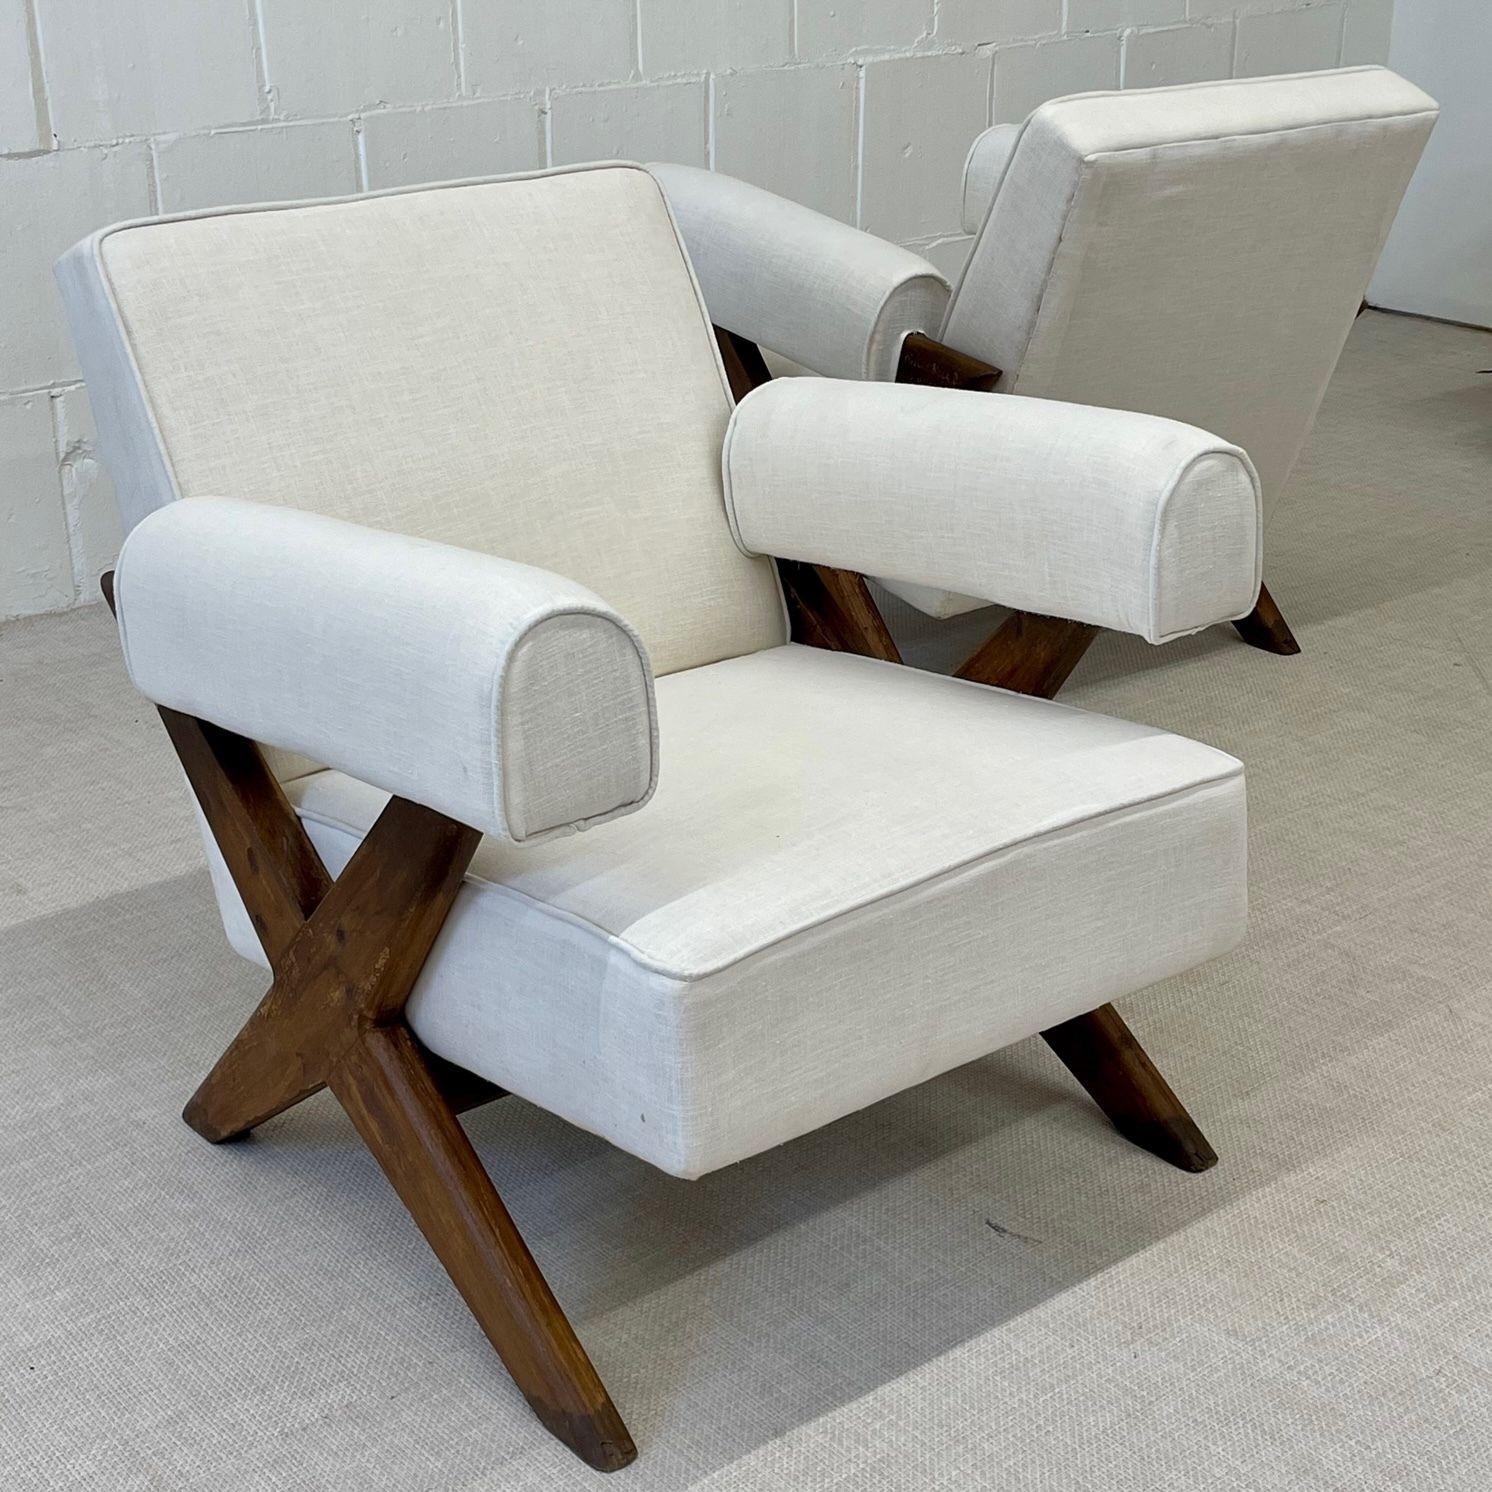 Indian Pierre Jeanneret, French Mid-Century Modern, Lounge Chairs, Chandigarh, 1960s For Sale